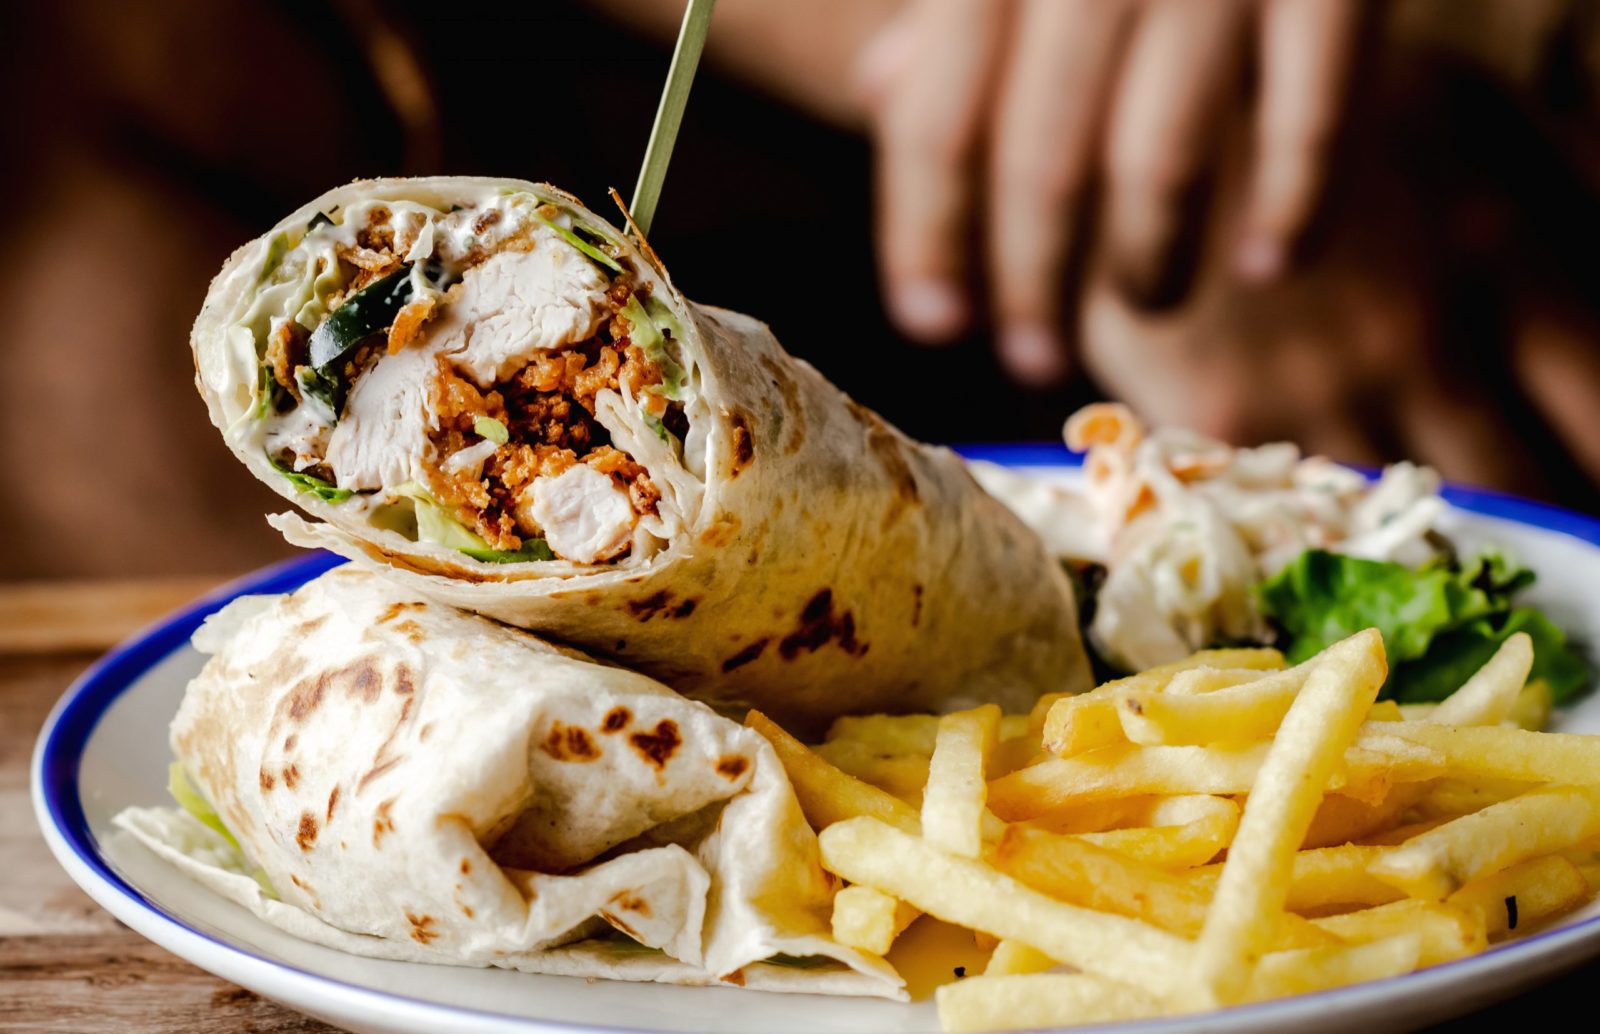 The George Chicken Wrap, as served